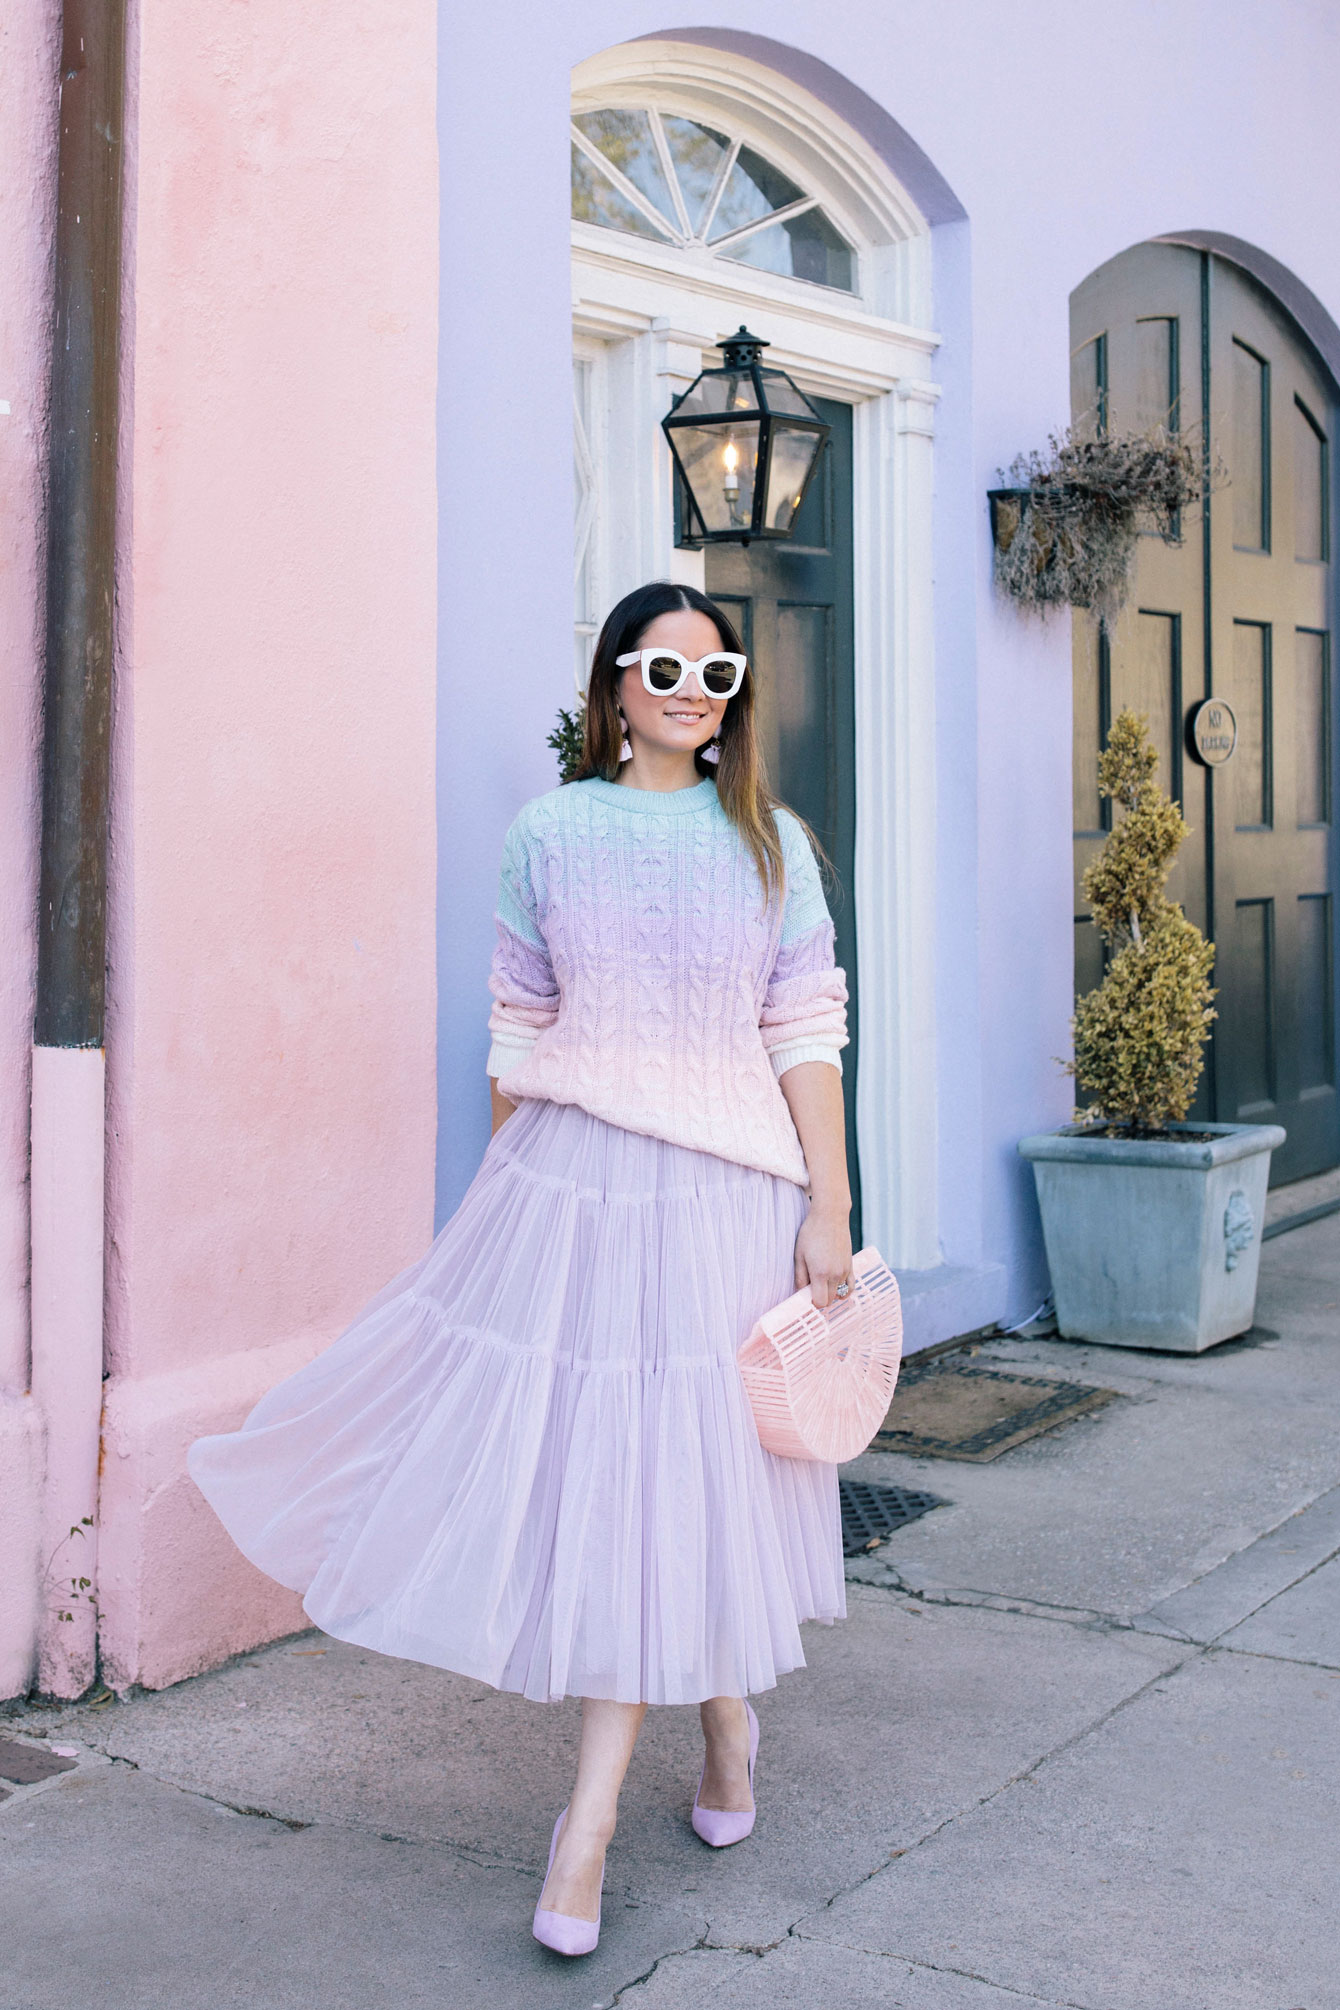 Lilac Tulle Skirt